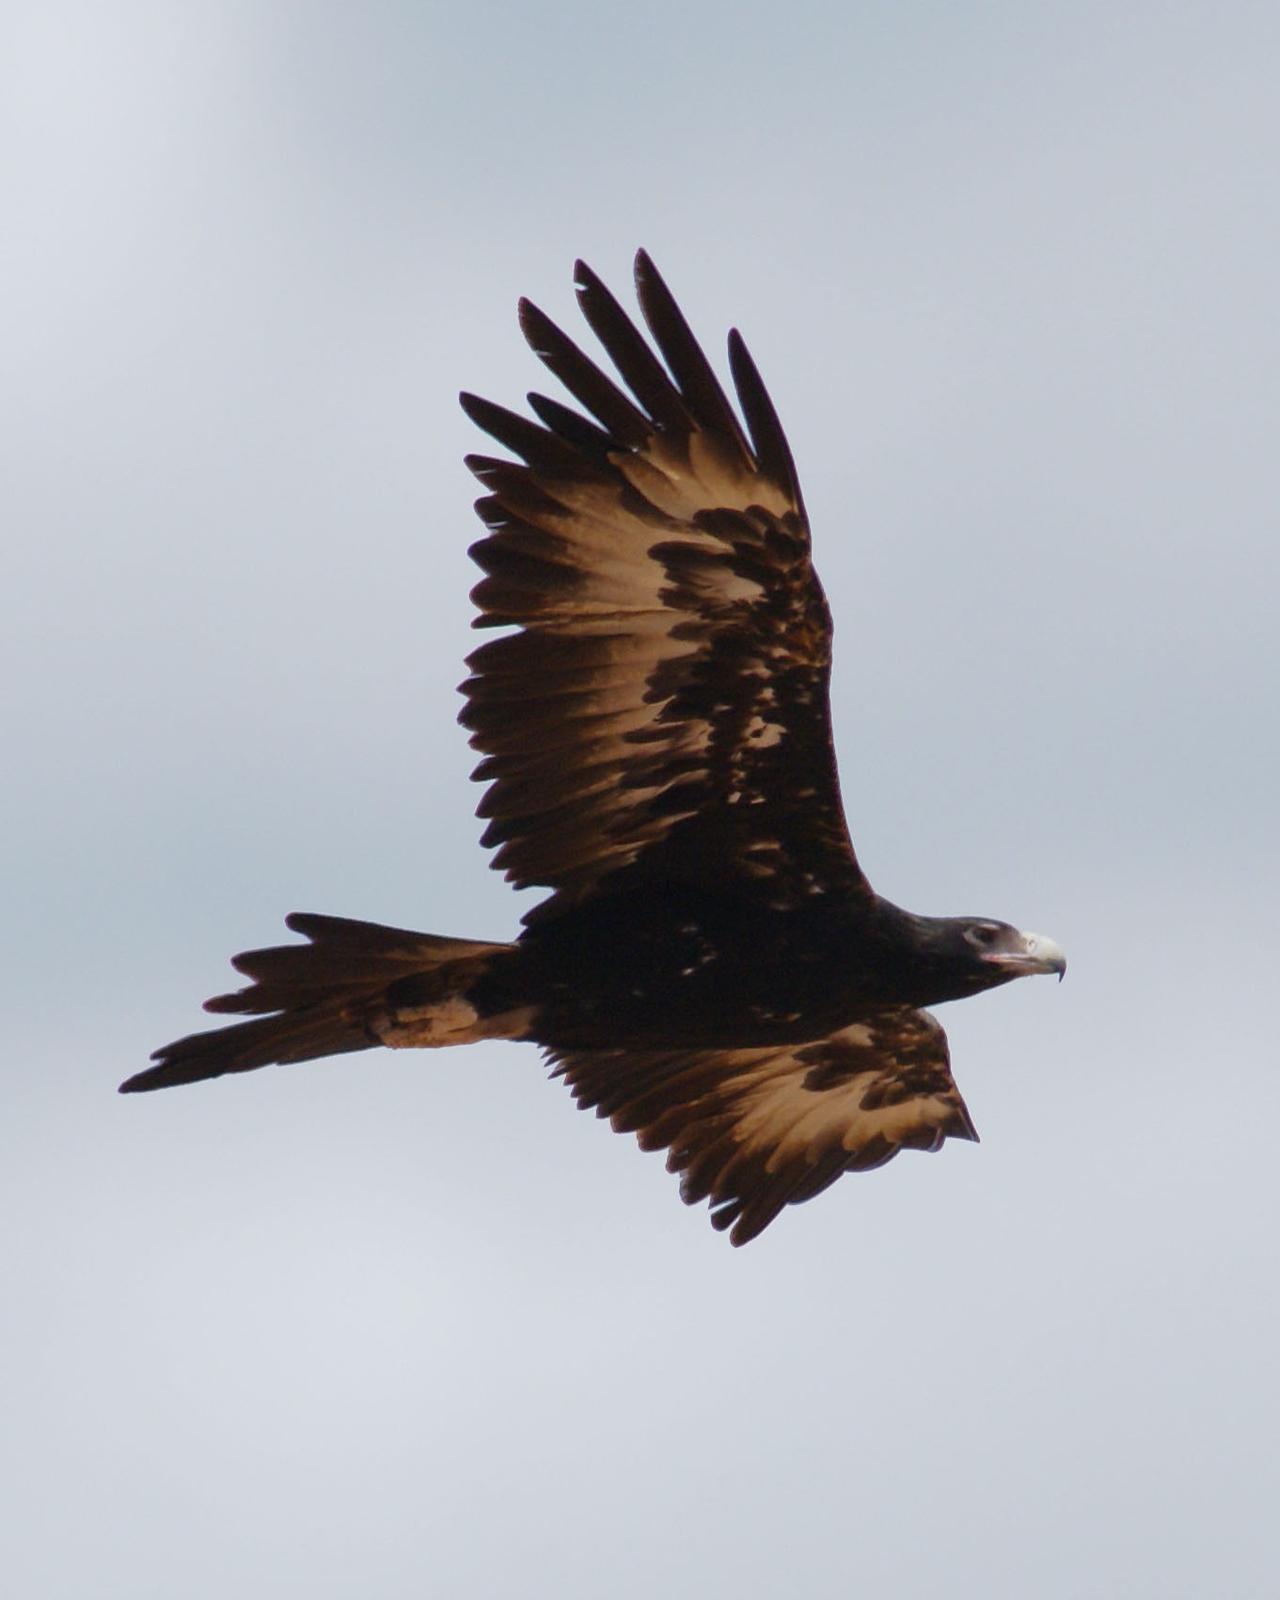 Wedge-tailed Eagle Photo by Steve Percival